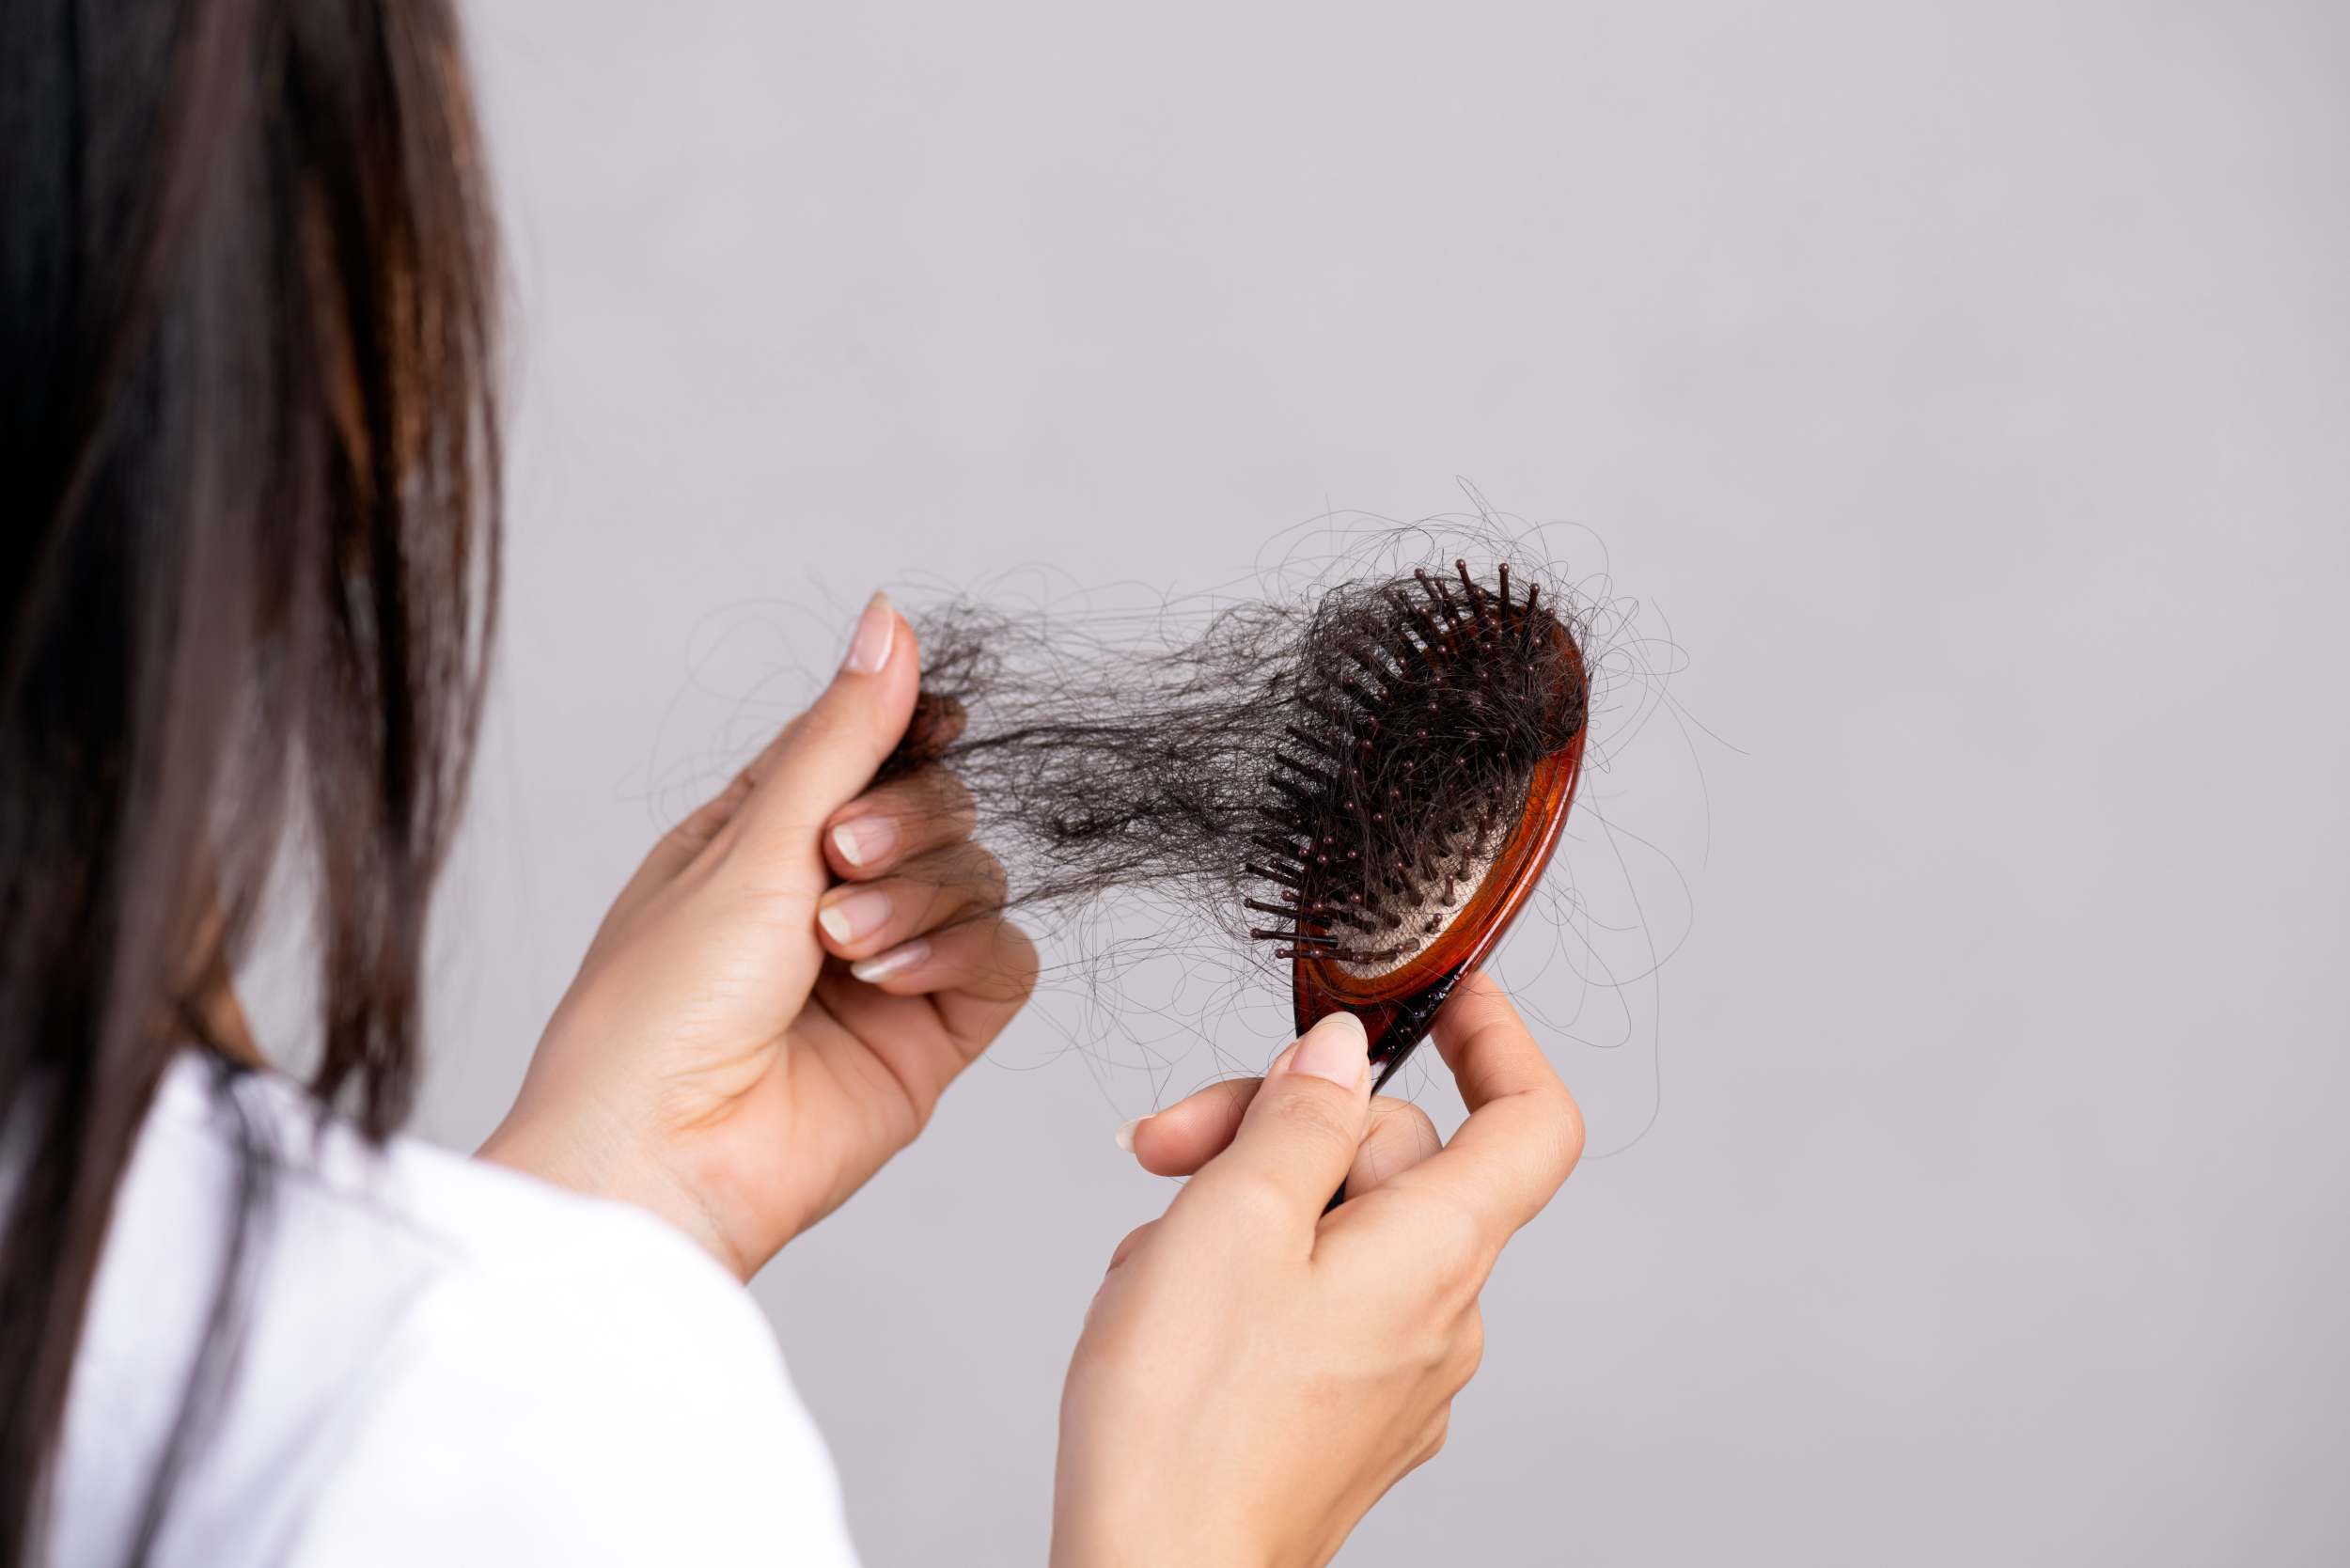 Can COVID-19 Infection Cause Hair Loss?